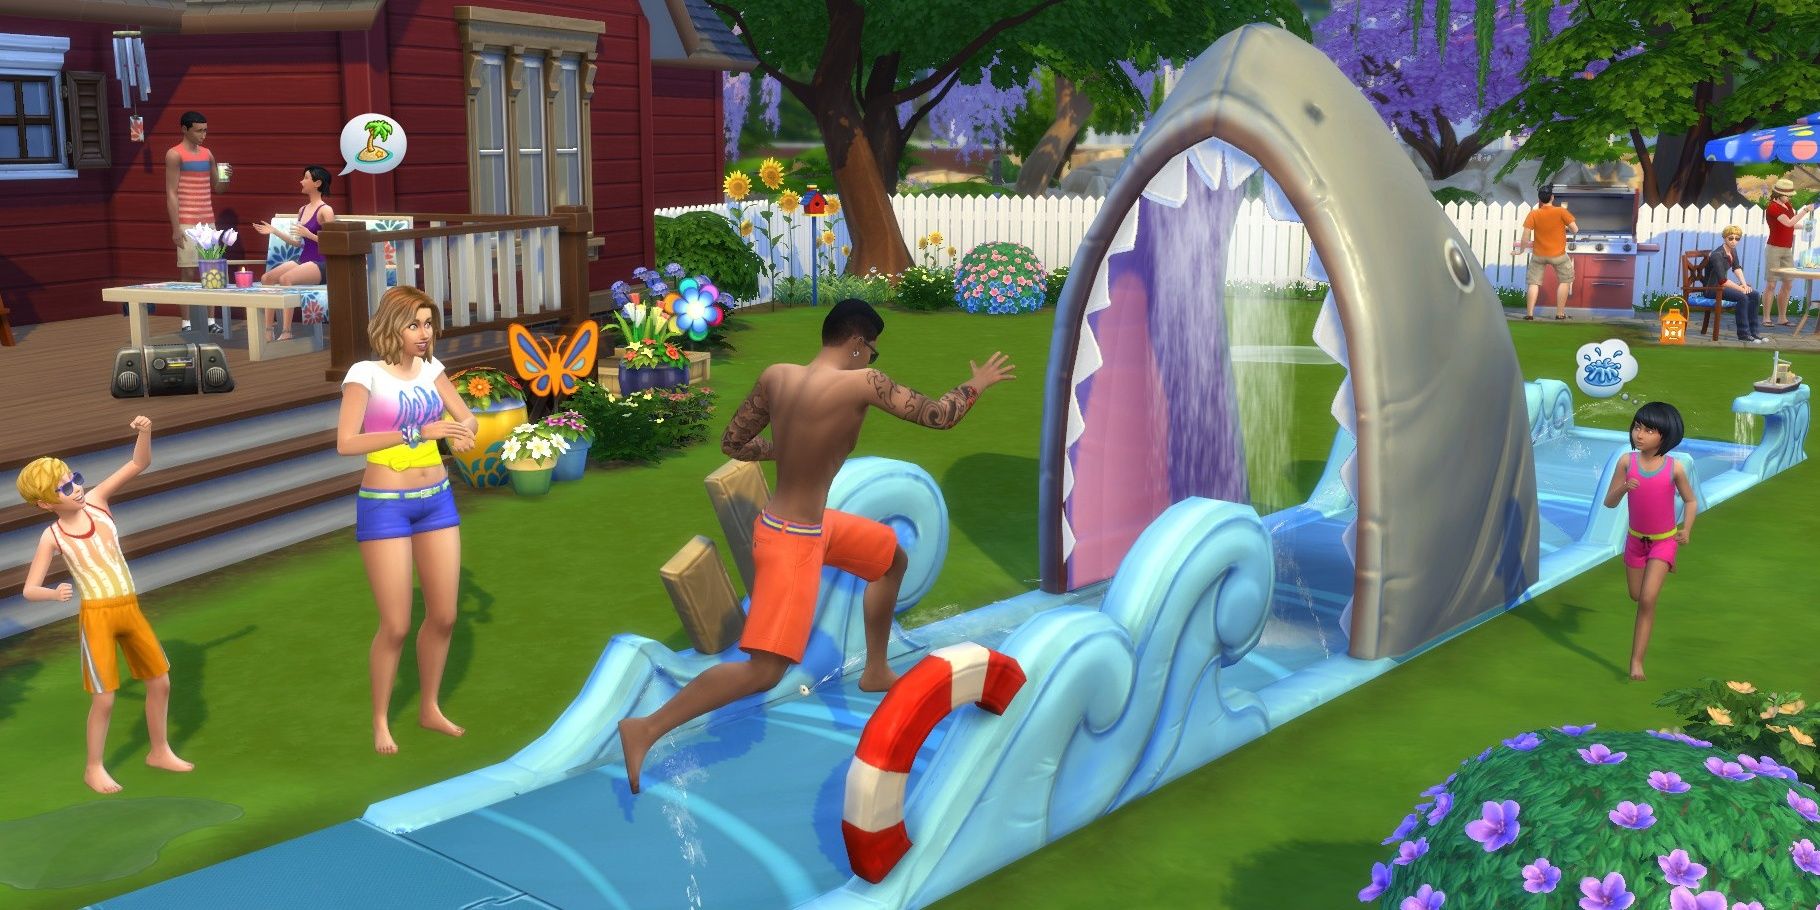 Sims at a barbeque enjoying the water slide in their backyard on the Summer Break holiday